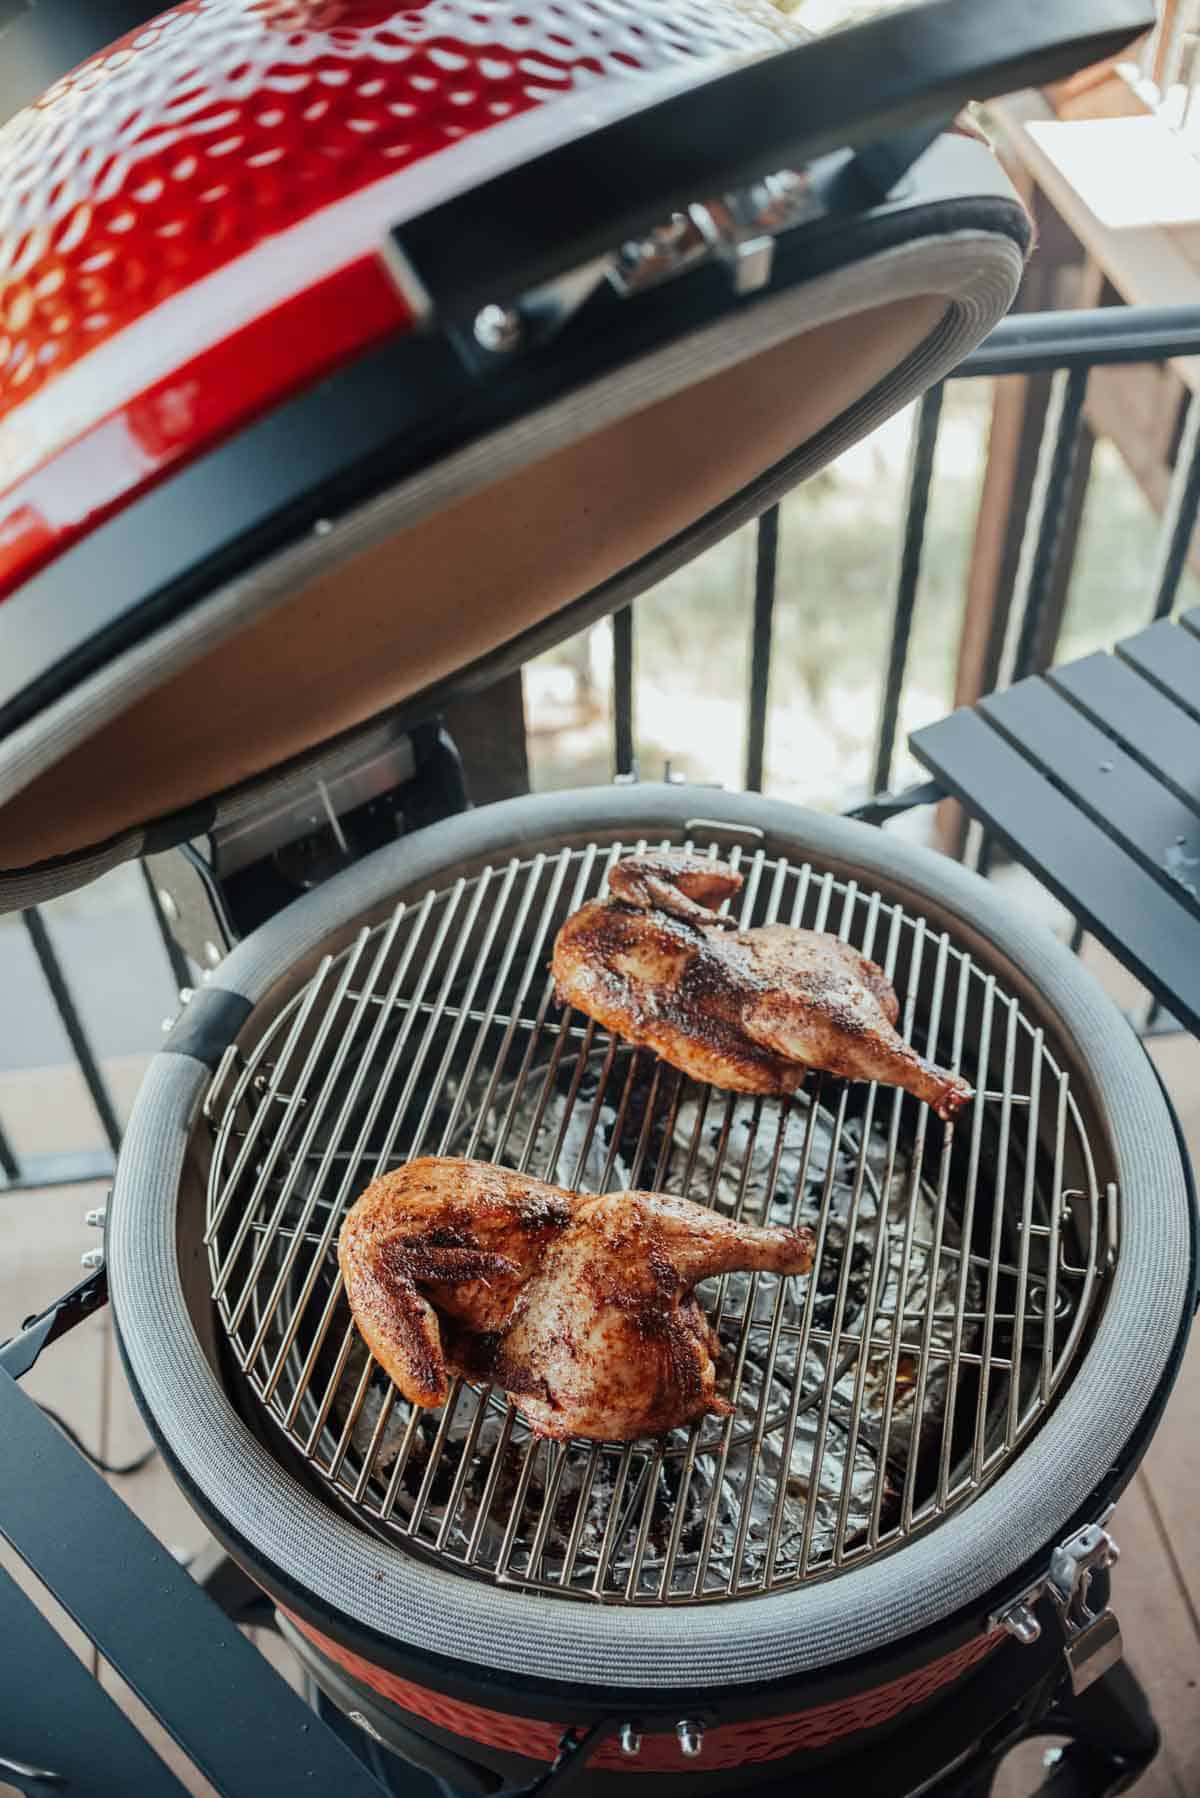 A partially open red kamado grill with two seasoned and grilled chicken halves on the grate on an outdoor patio.